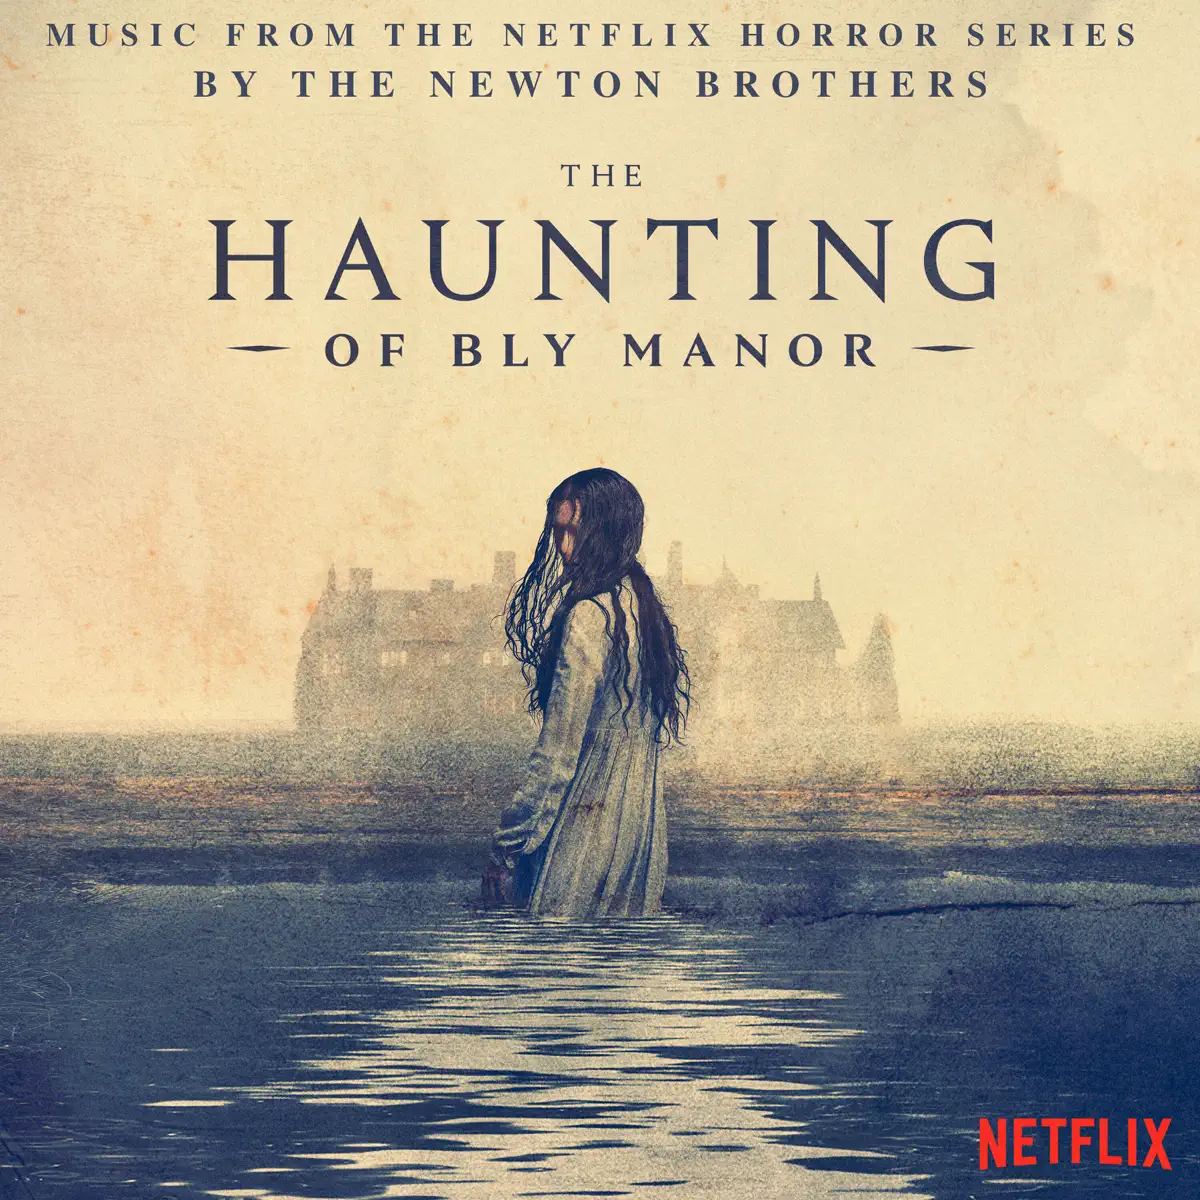 The Newton Brothers - 鬼庄园 The Haunting of Bly Manor (Music from the Netflix Horror Series) (2020) [iTunes Plus AAC M4A]-新房子